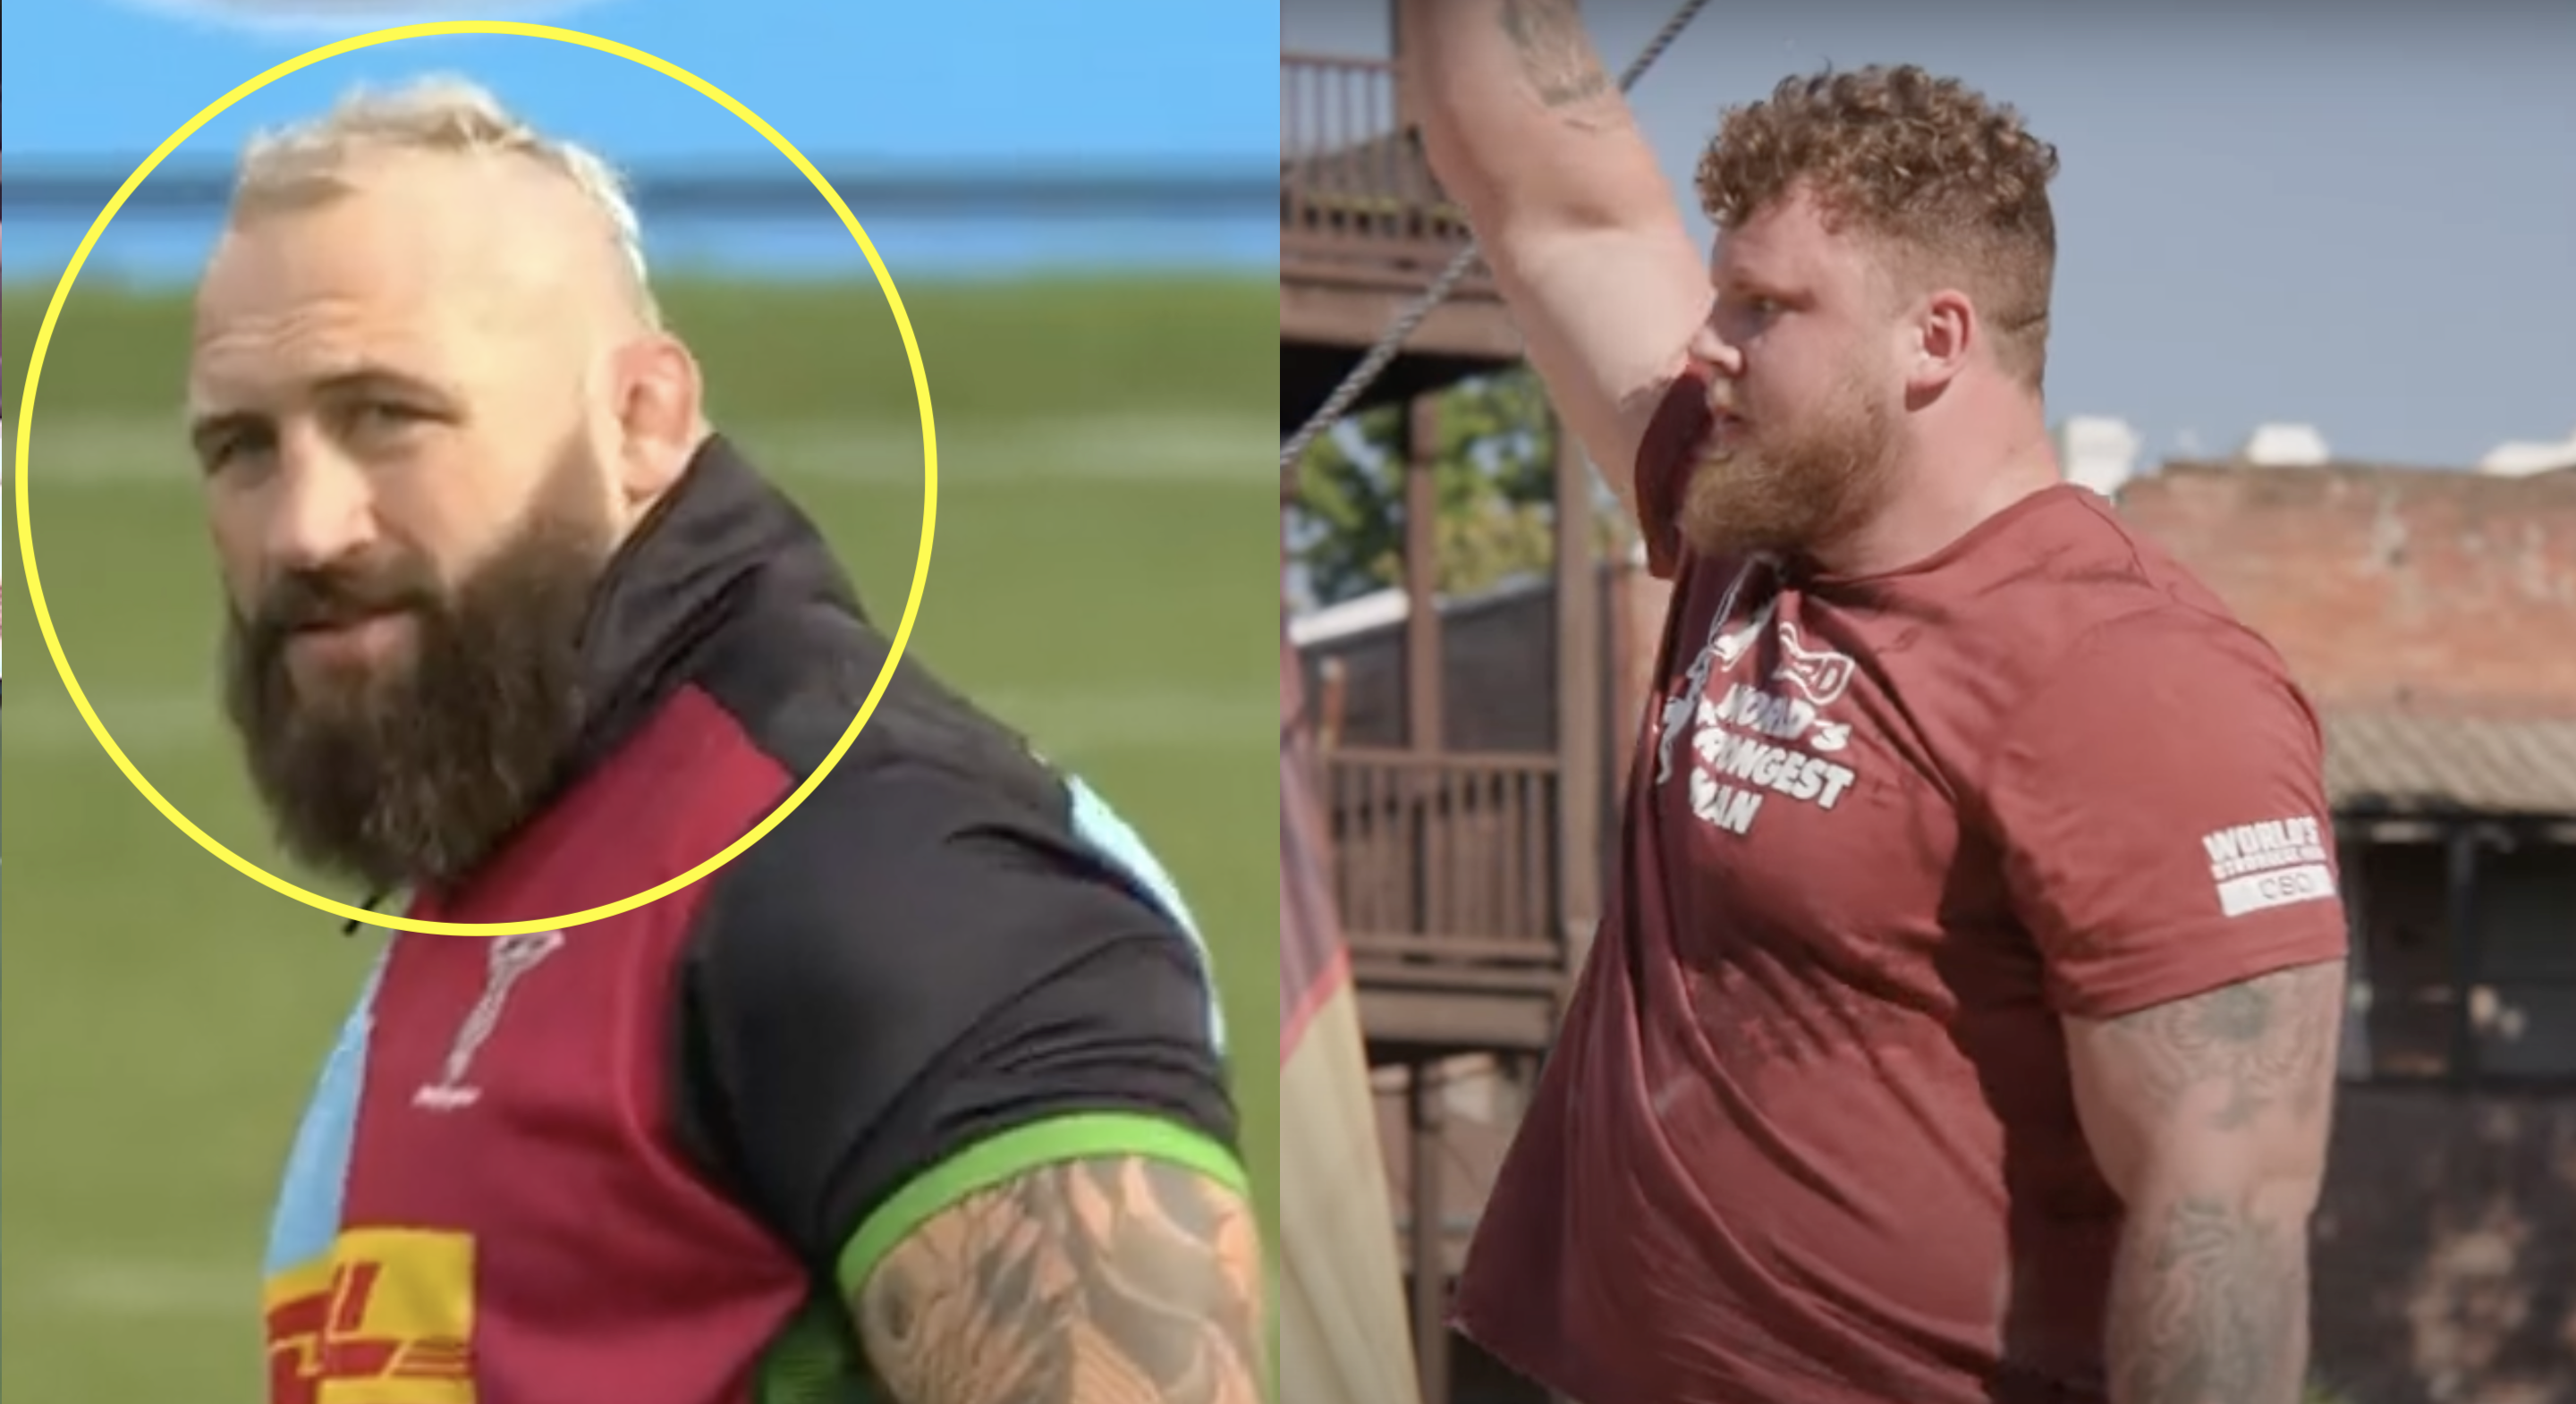 Joe Marler made to look like scrum-half after world's strongest man visits Quins